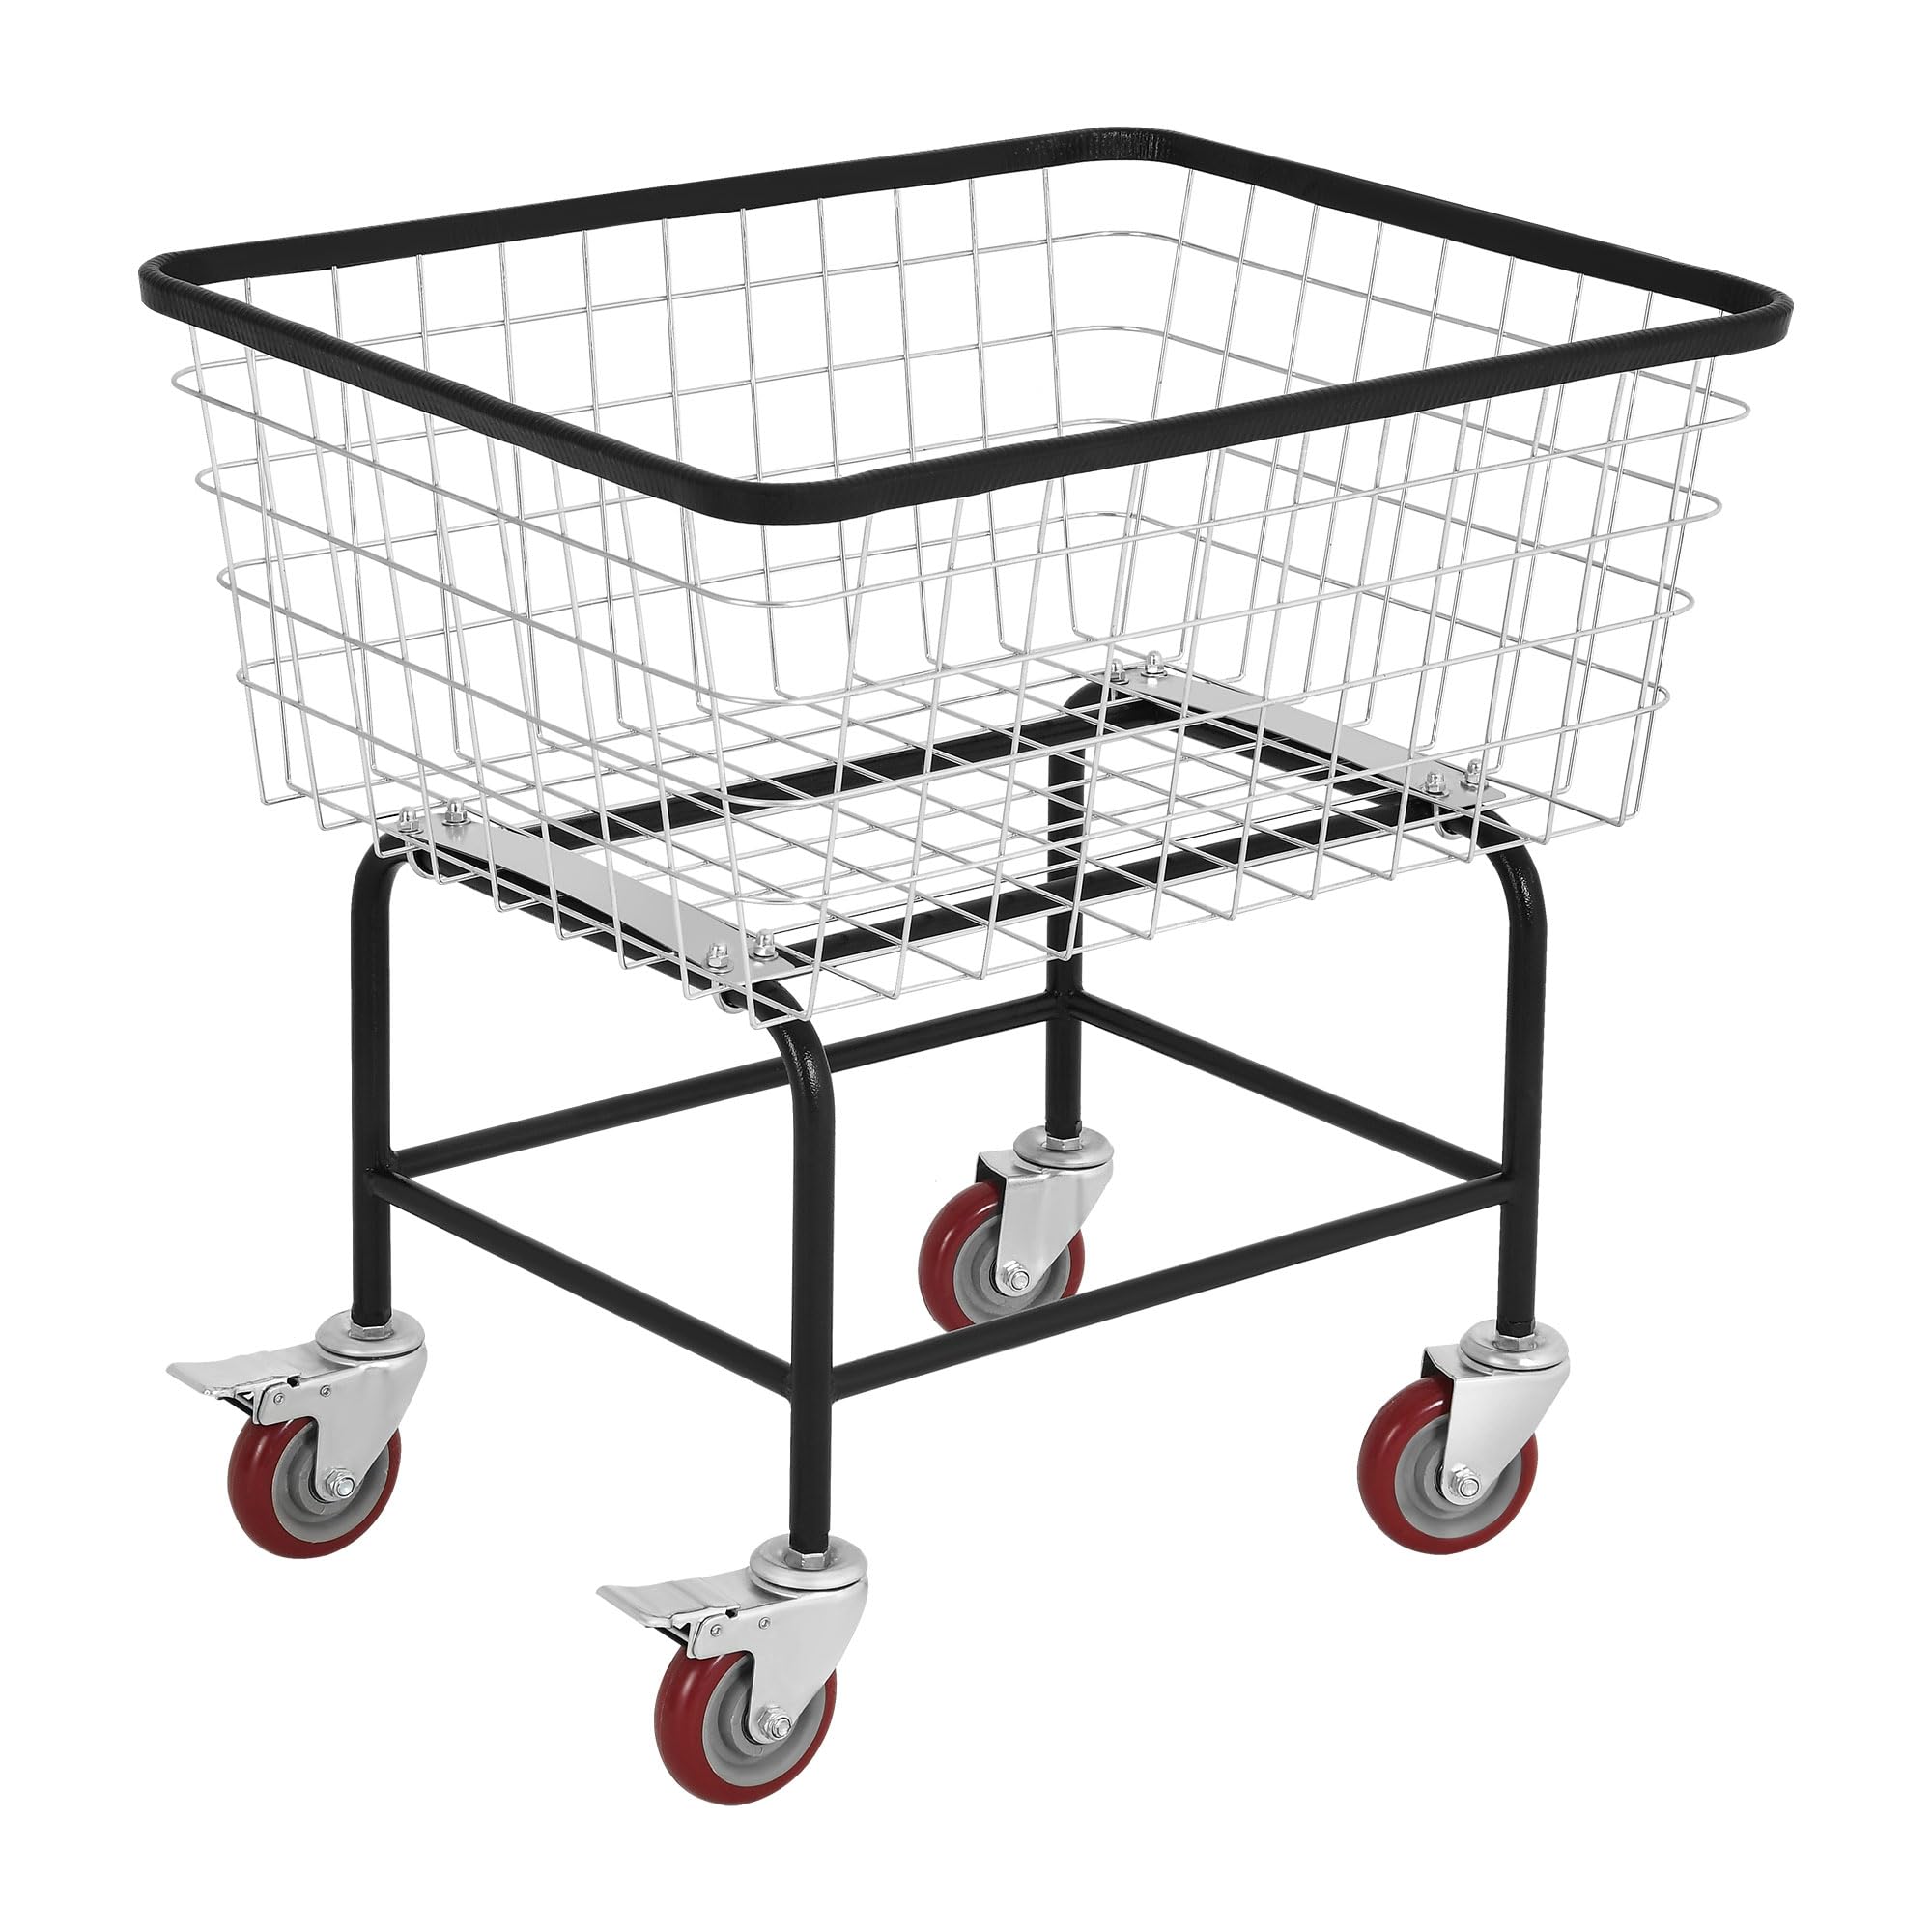 YITAHOME Wire Laundry Cart 4.5 Bushel, Rolling Laundry Basket with Wheels, Metal Commercial Wire Laundry Basket Cart with Galvanized Finish, Heavy Duty Large Steel Basket for Laundry Clothes Storage